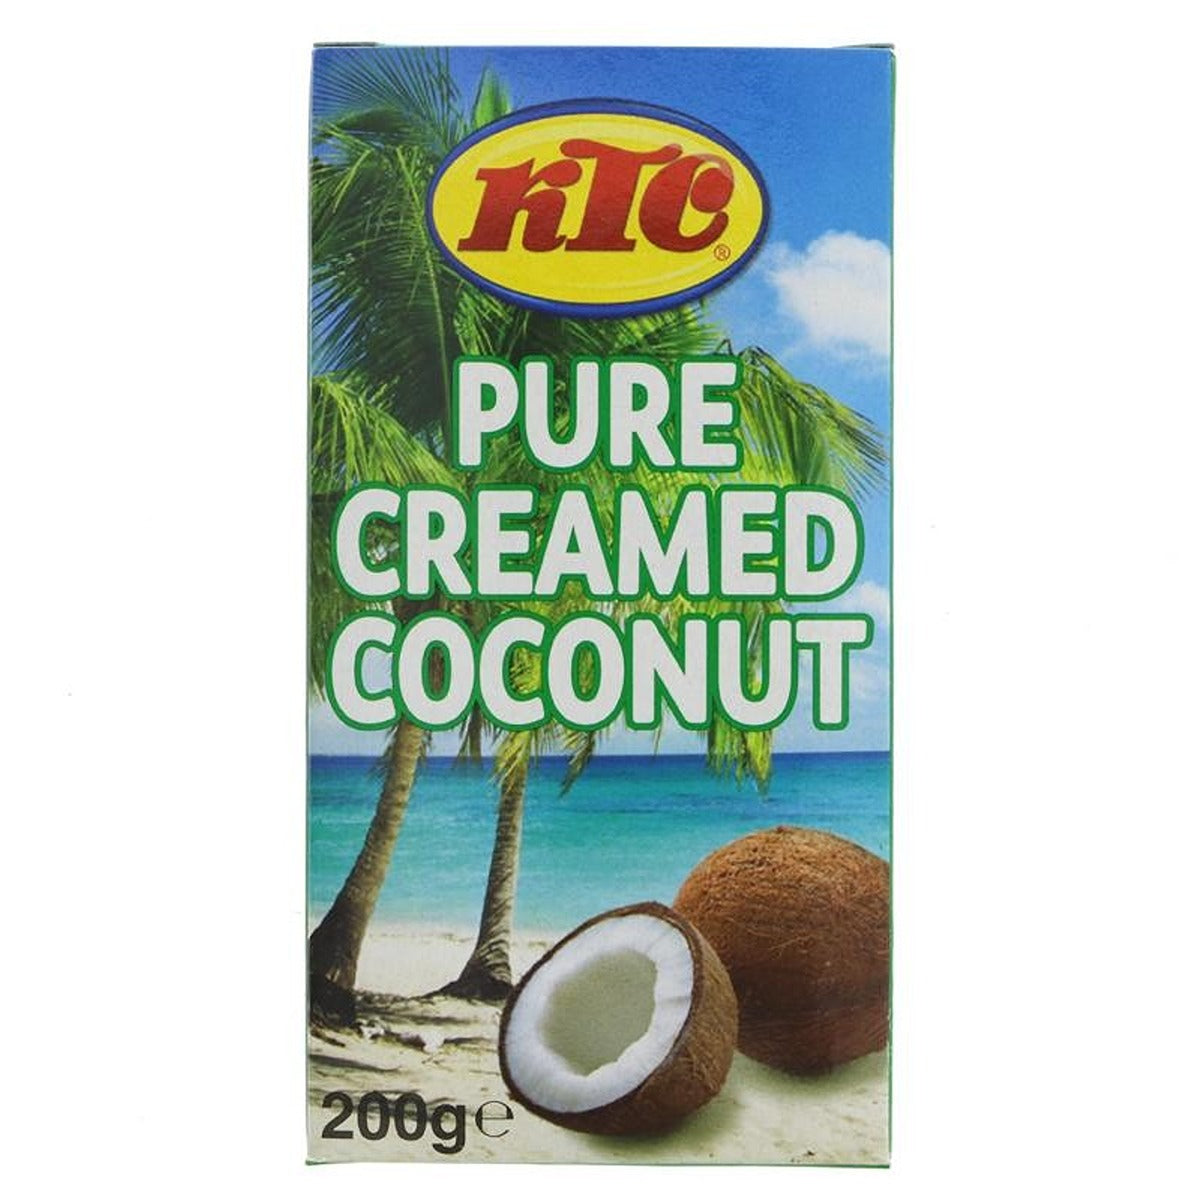 KTC - Pure Creamed Coconut  - 200g - Continental Food Store